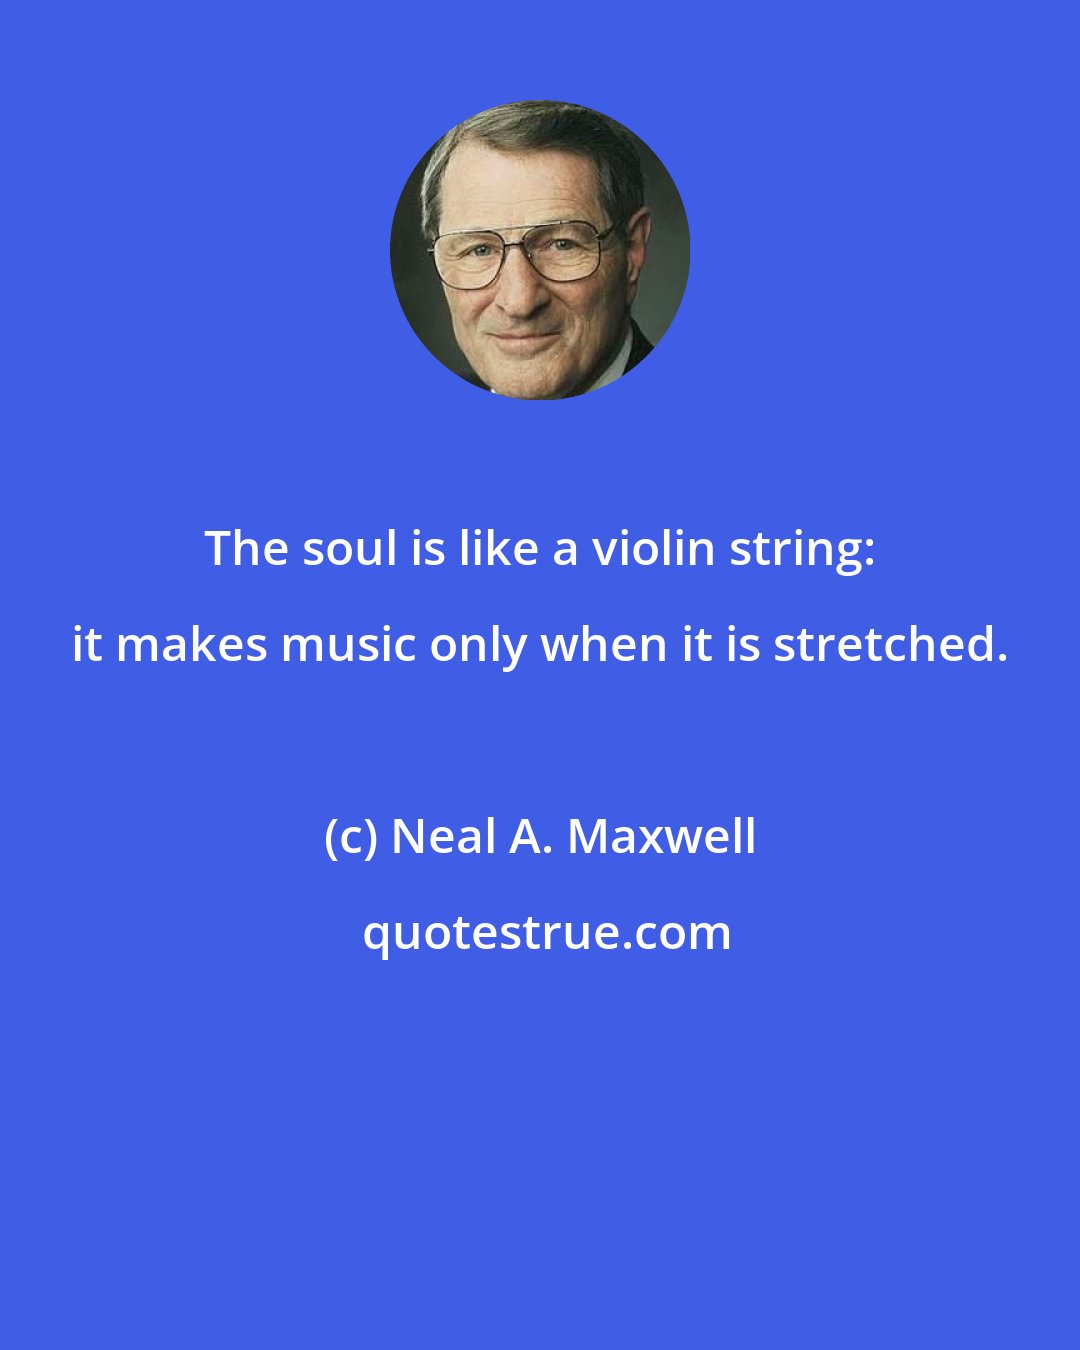 Neal A. Maxwell: The soul is like a violin string: it makes music only when it is stretched.